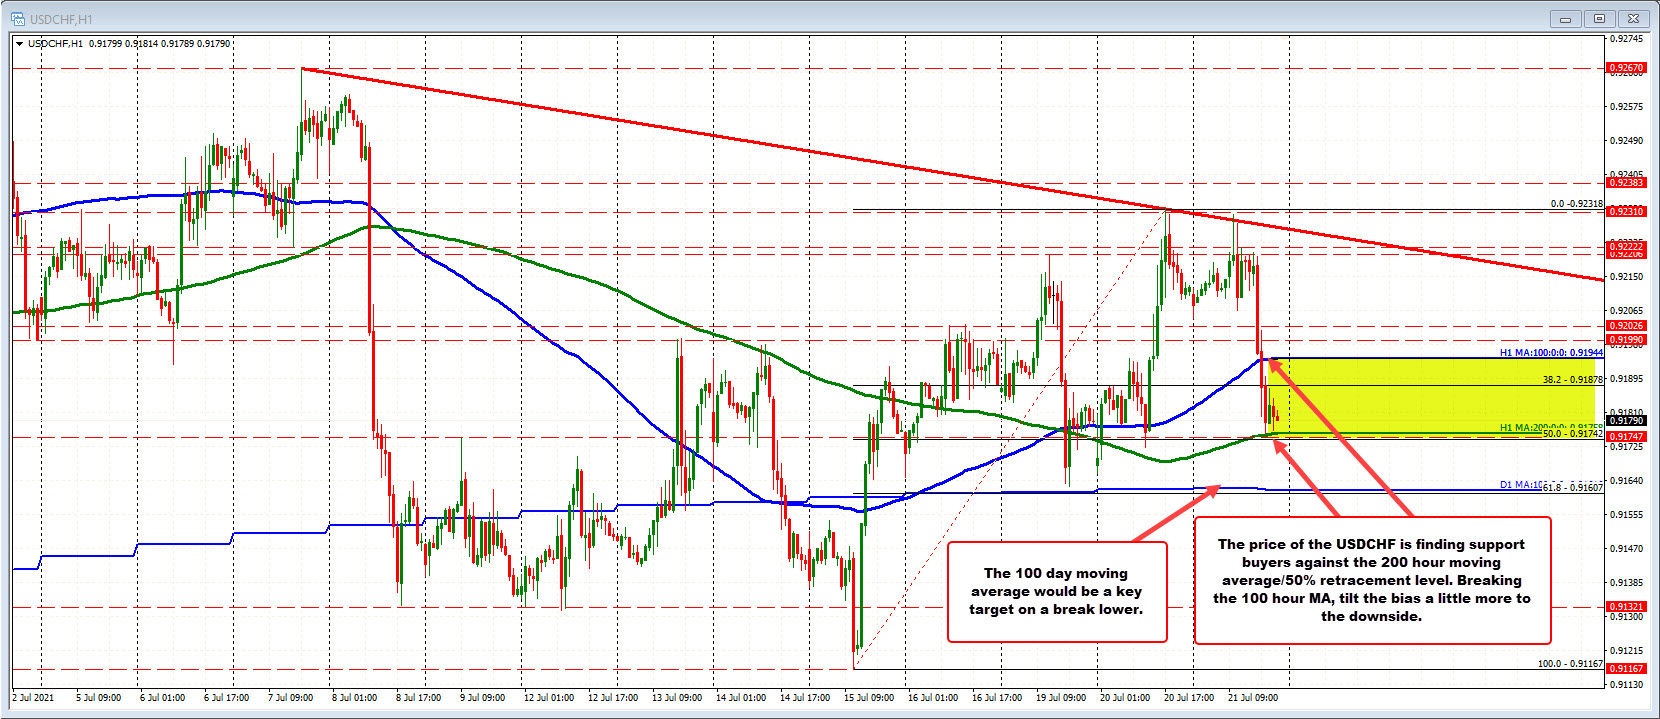 USDCHF moves below the 100 hour MA but stalling near the _200 hour MA/50% retracement